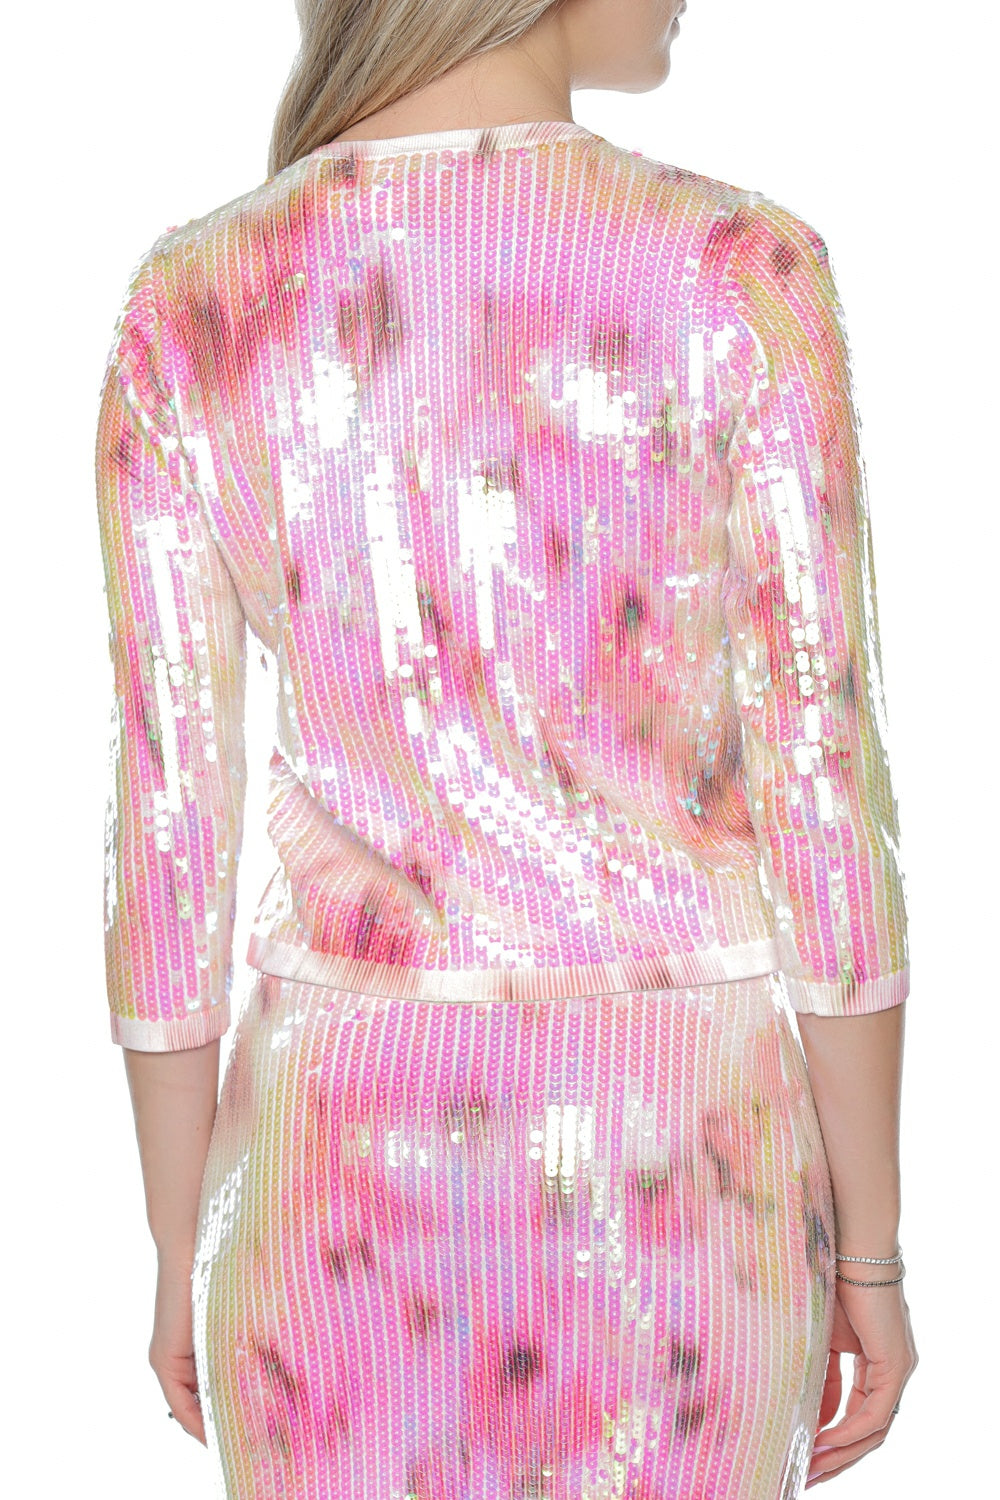 Cardigan Ted Baker Miiliee Printed Sequin